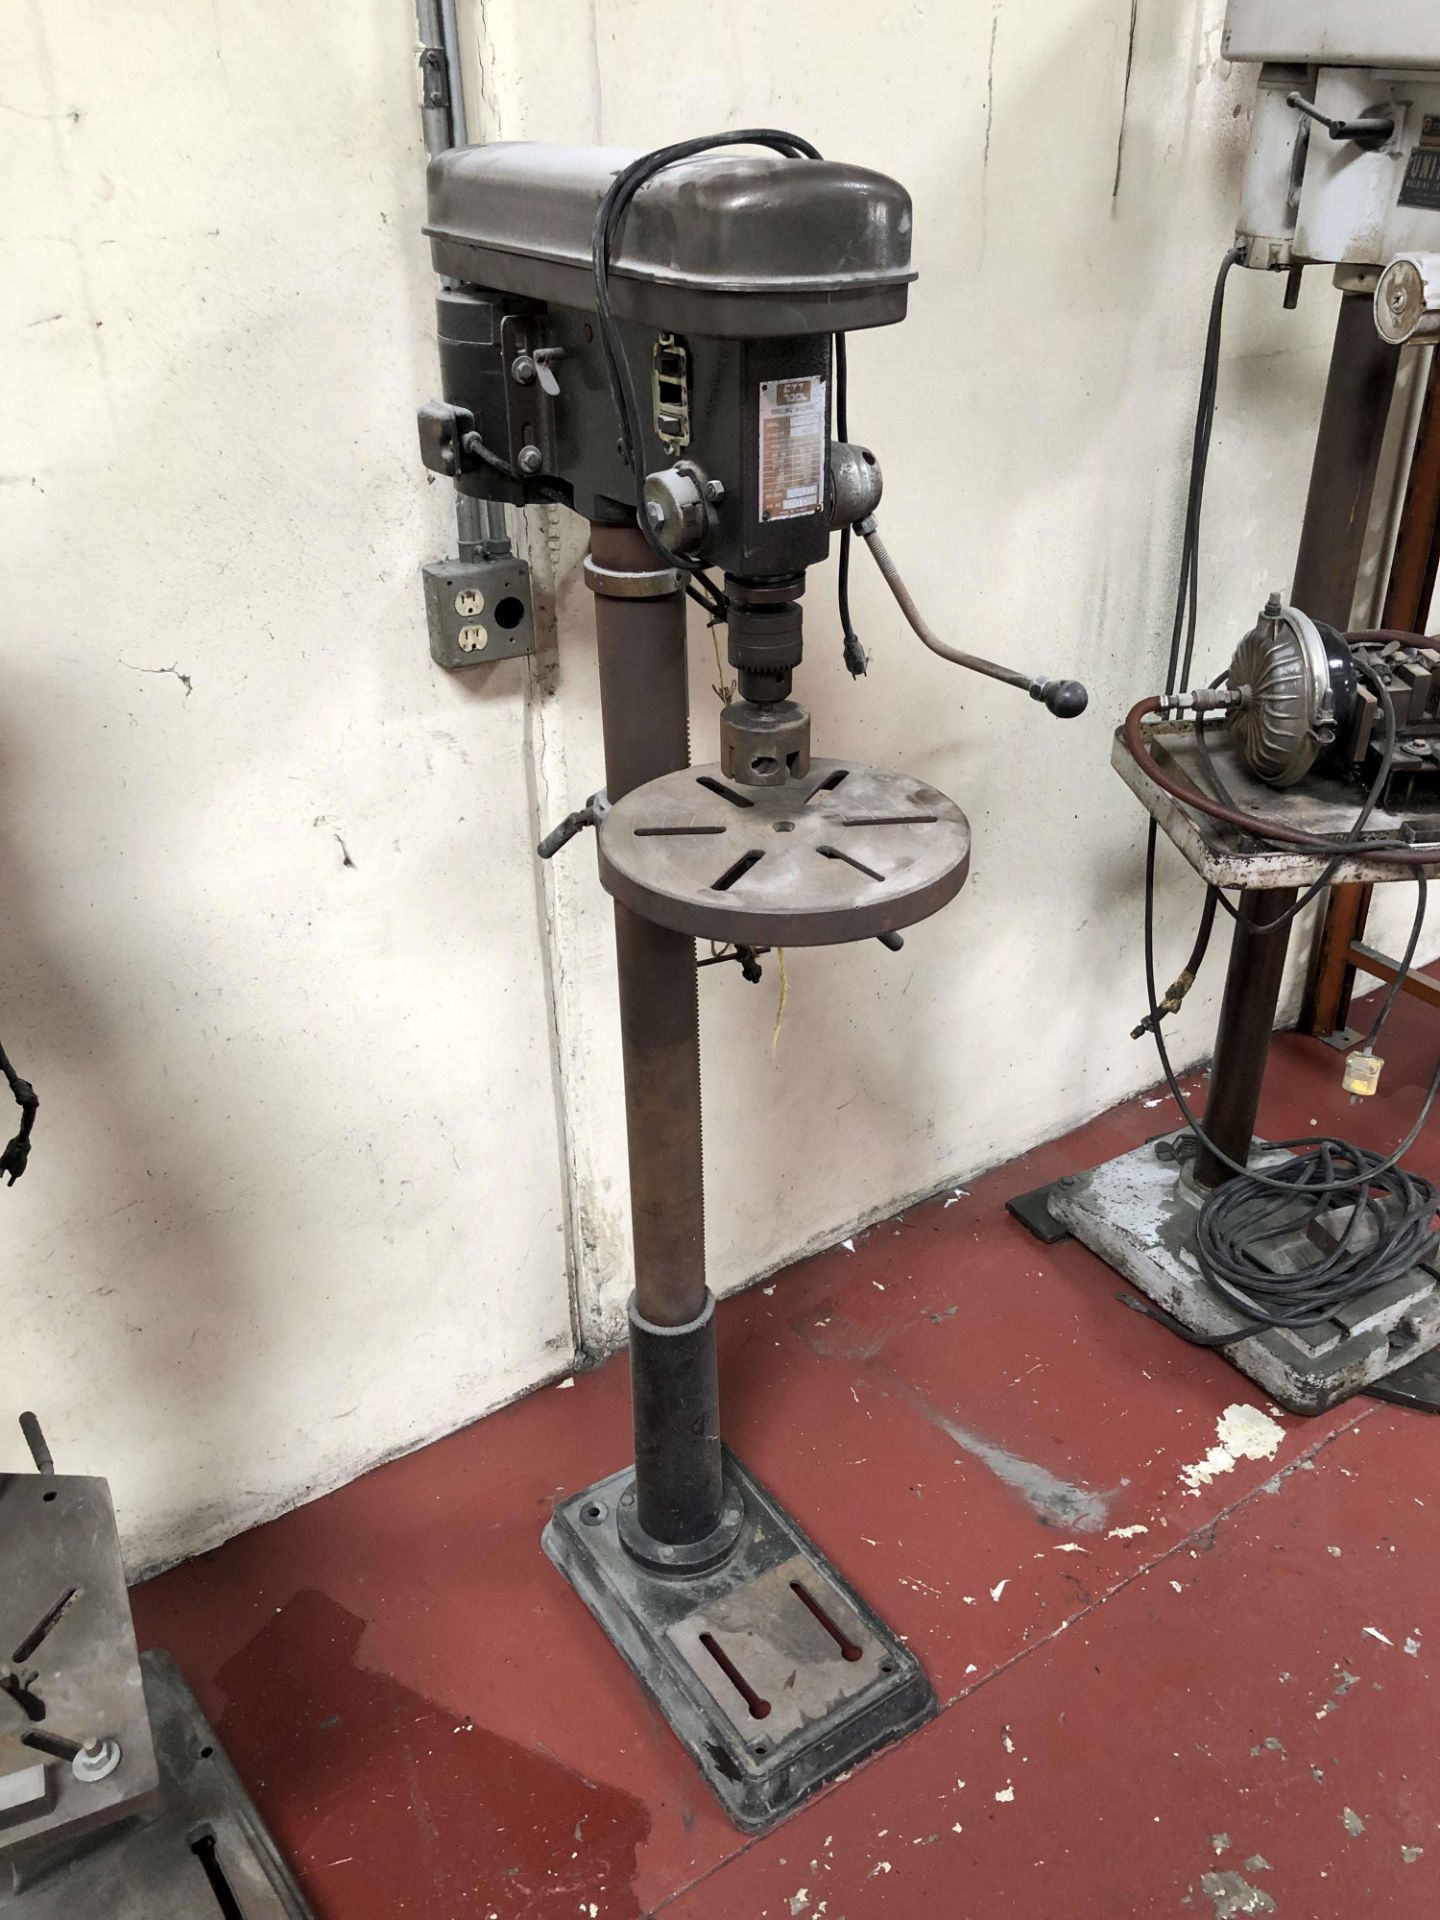 All Tool 13" Floor Drill Press, Model CTT-13F, 455 to 2630 RPM, S/N 49185 - Image 2 of 3